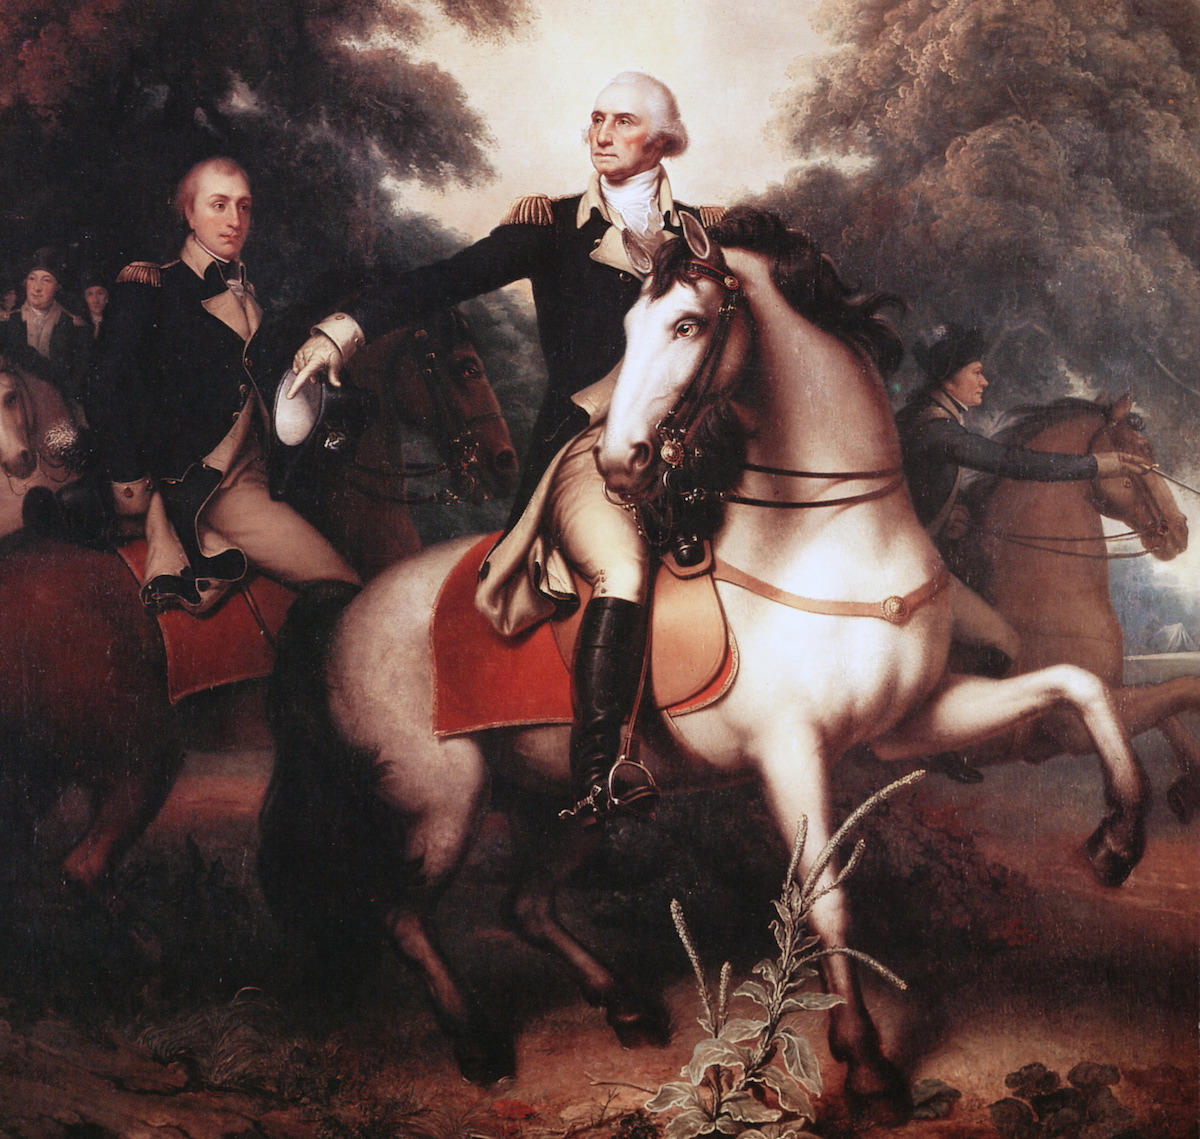 Washington before Yorktown by Rembrandt Peale (1778-1860). The picture shows George Washington, full-length portrait, in full dress uniform on horseback preparing his troops for the final battle of the Revolutionary War in Yorktown, Virginia. The fig